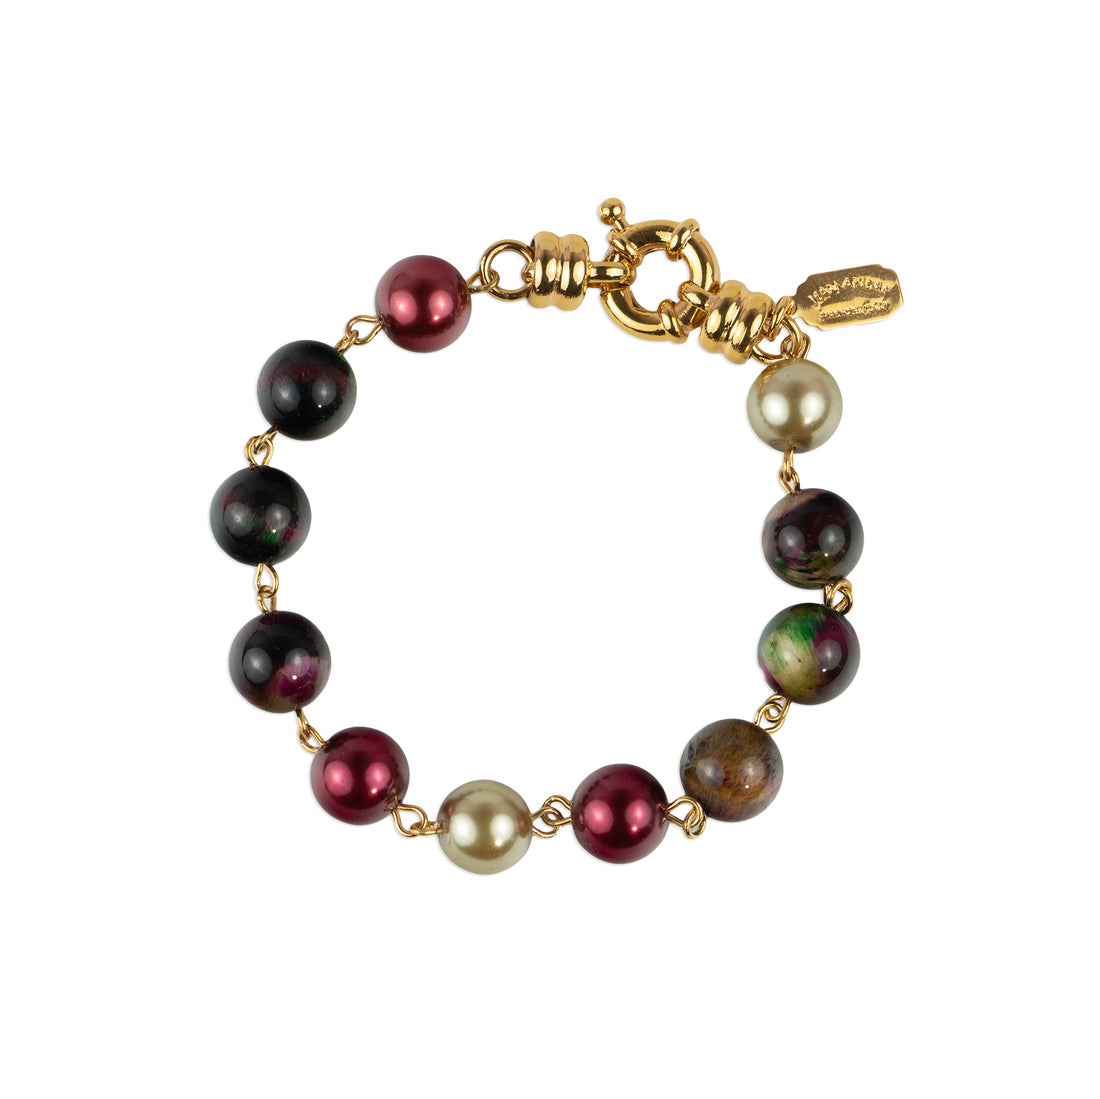 Bracelet with snap clasp in semi-precious stones and pearls